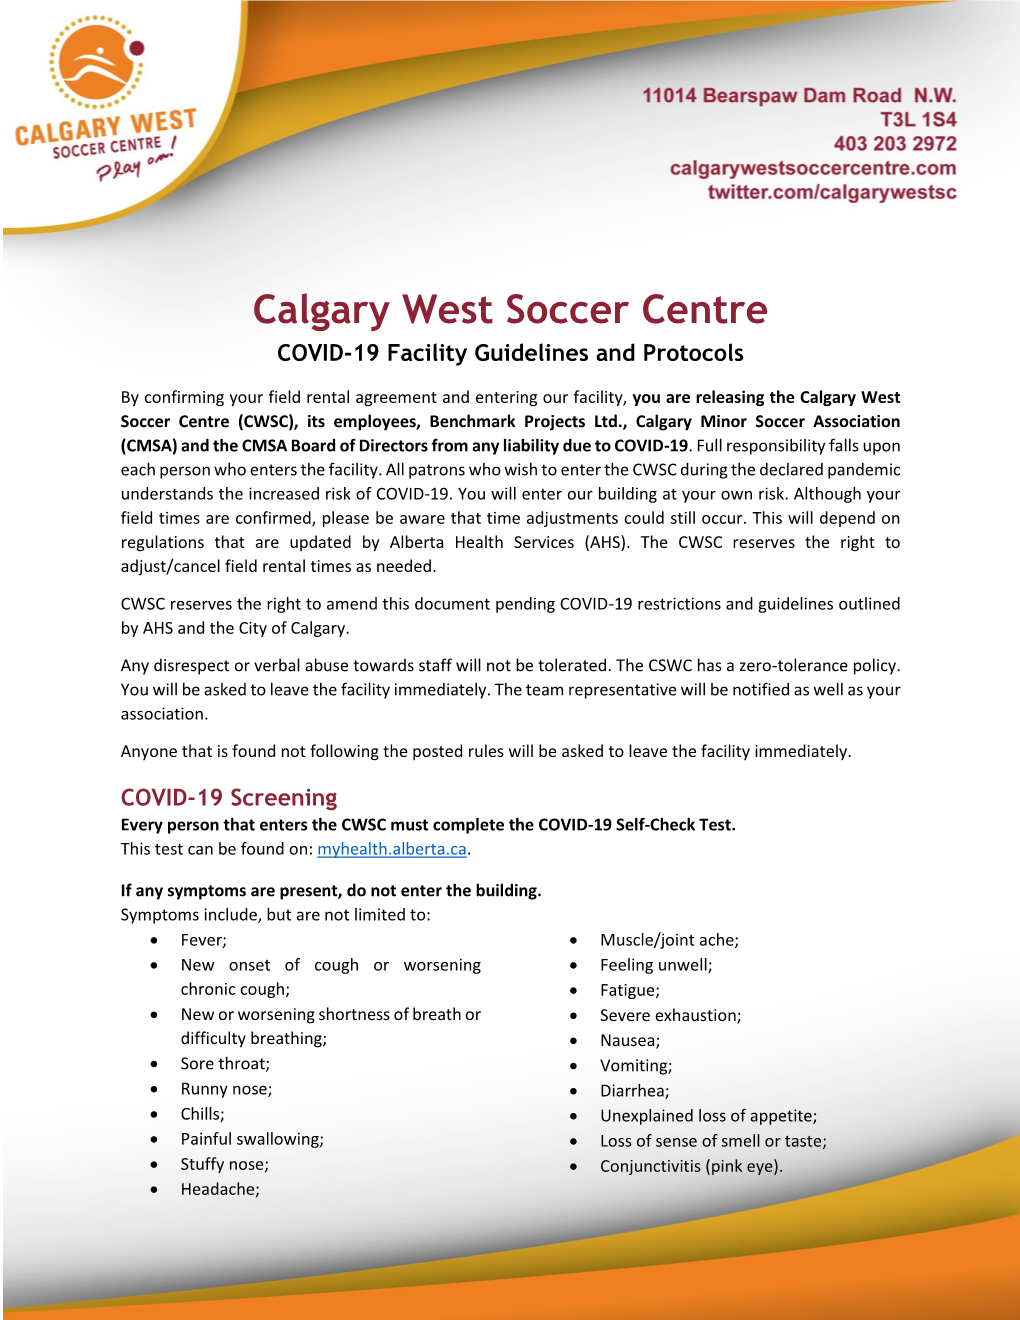 Calgary West Soccer Centre COVID-19 Facility Guidelines and Protocols